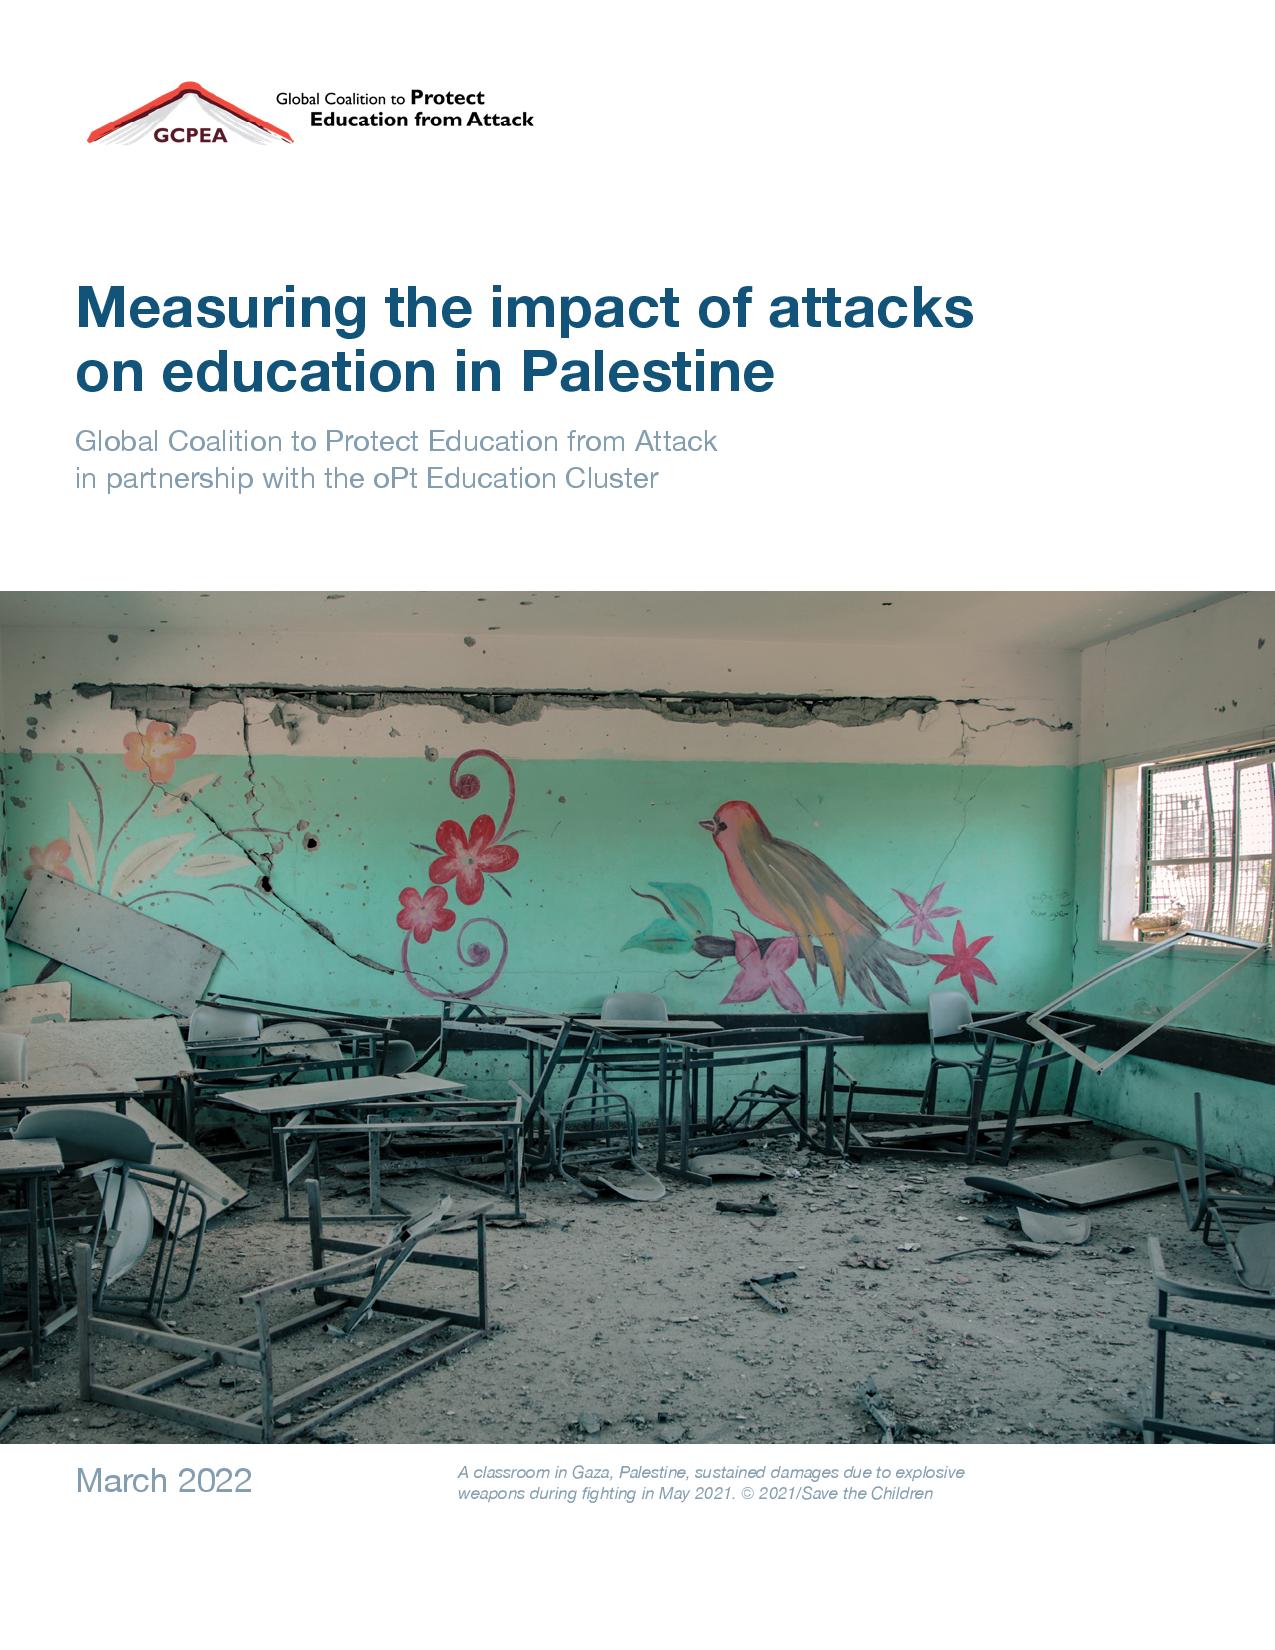 impact_attackeducation_palestine_2022_en-page-001